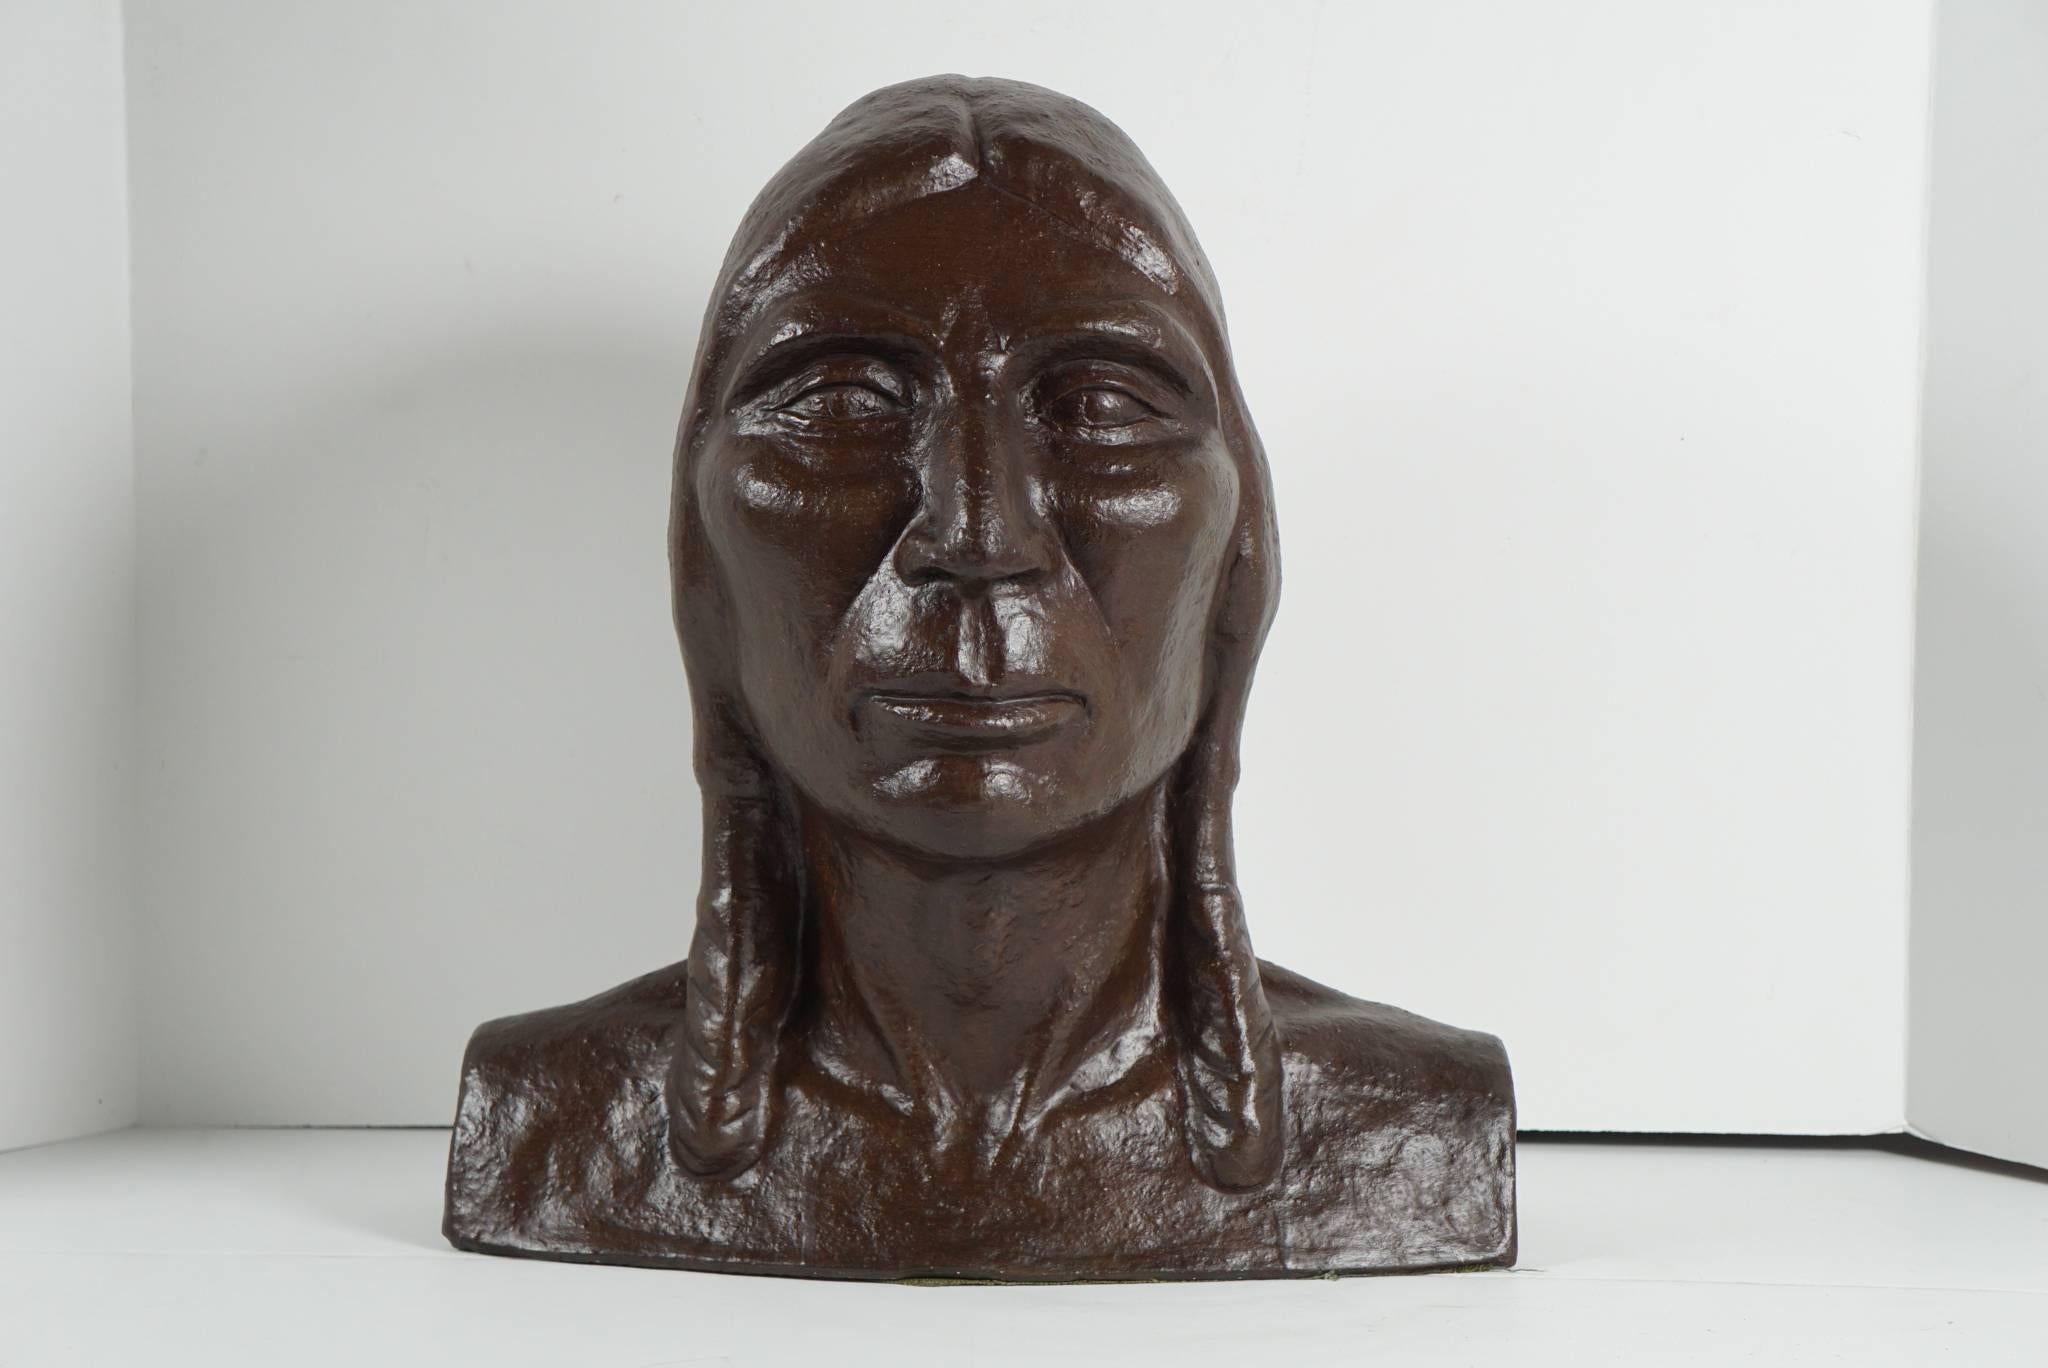 Created circa 1915 this work in bronzed plaster is from the school of art dealing with the diminishing culture of Native Americans as witnessed by European schooled painters and sculptures in the American southwest. Hand molded and sensitive to that